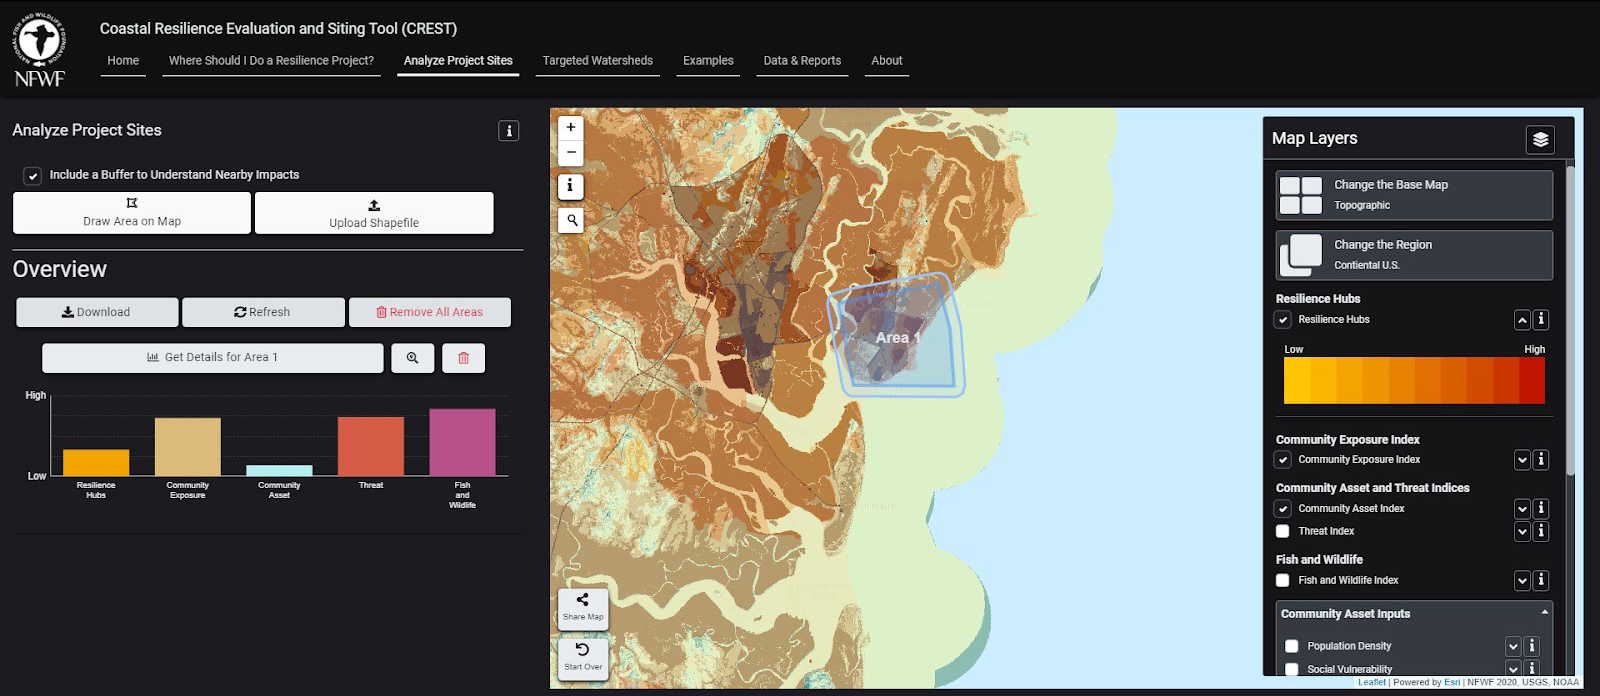 A screenshot of the tool, Coastal Resilience Evaluation and Siting Tool, being used.